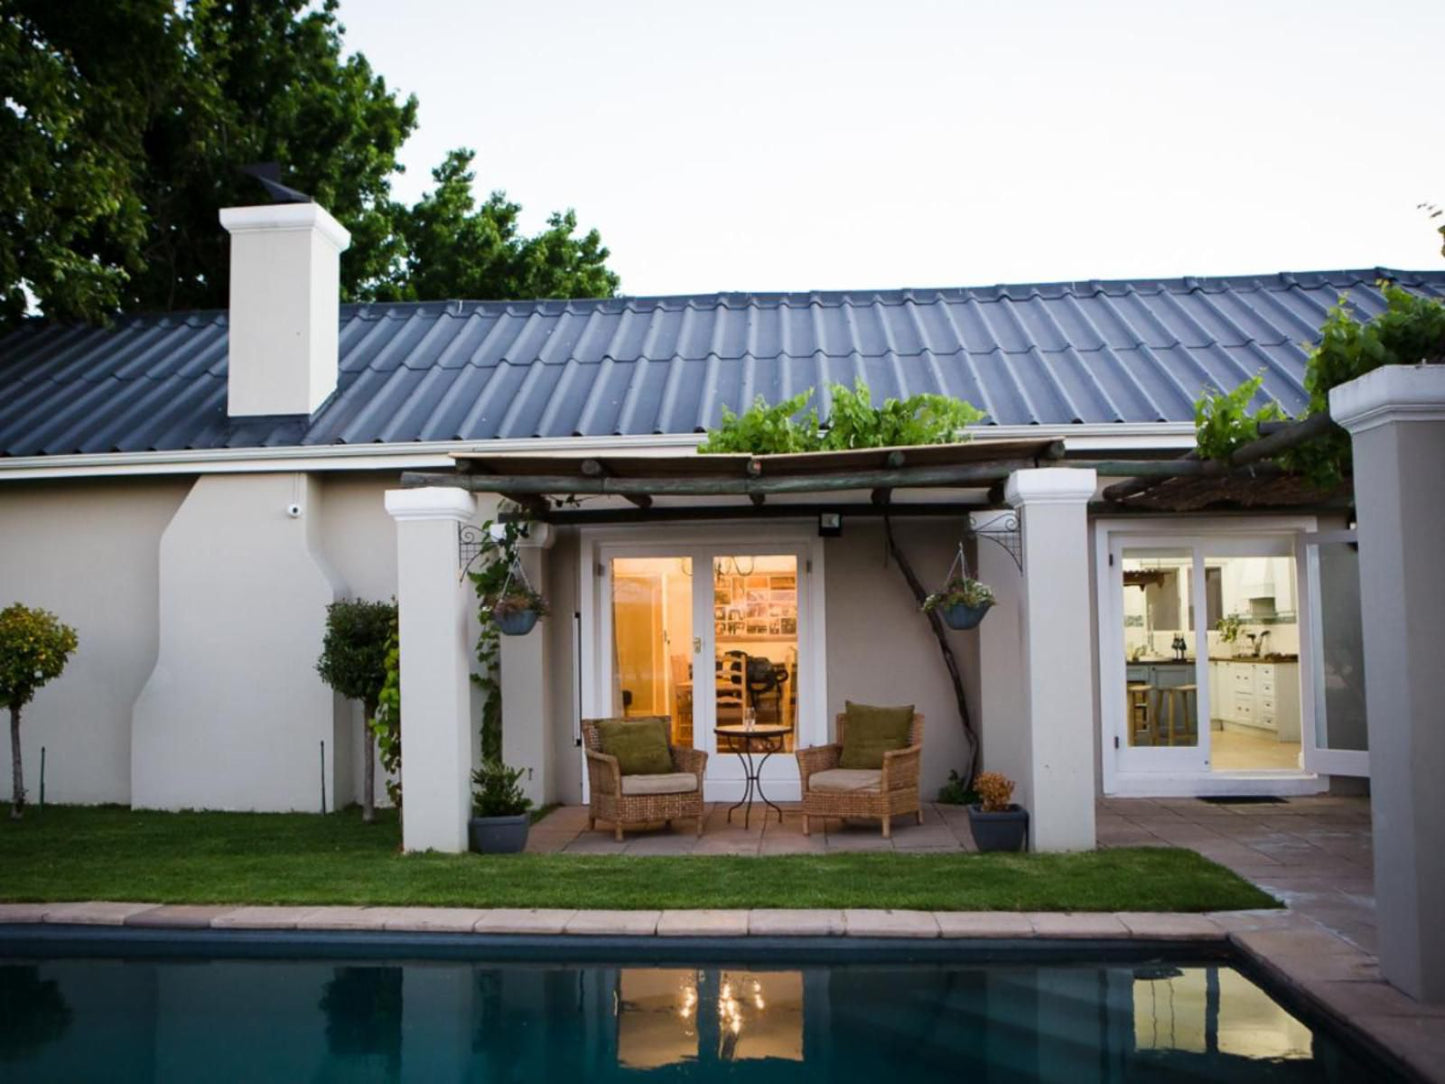 Doran Vineyards Paarl Farms Paarl Western Cape South Africa House, Building, Architecture, Garden, Nature, Plant, Swimming Pool